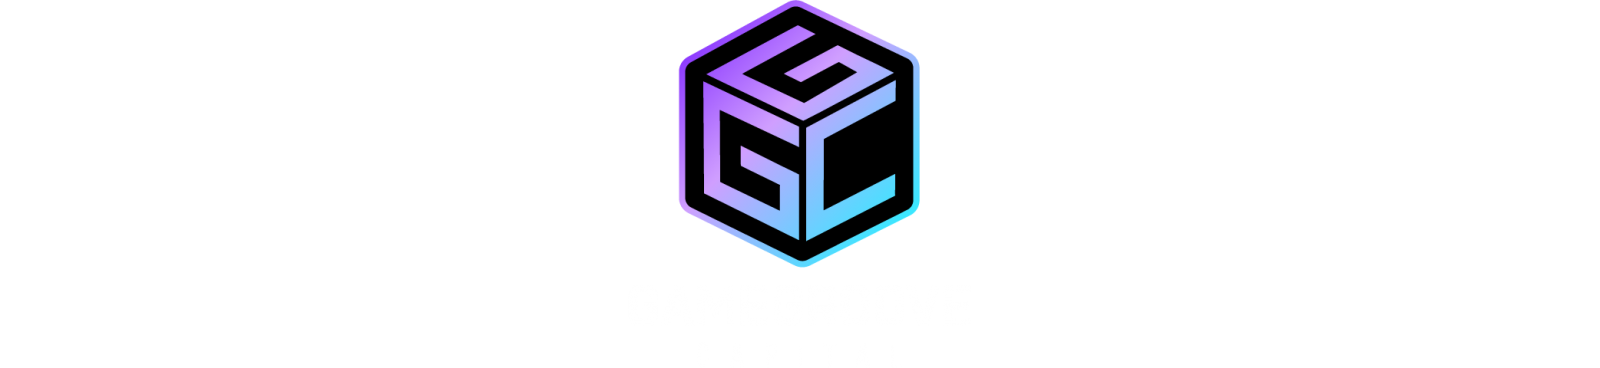 Gamegroove Capital - Official Logo - White